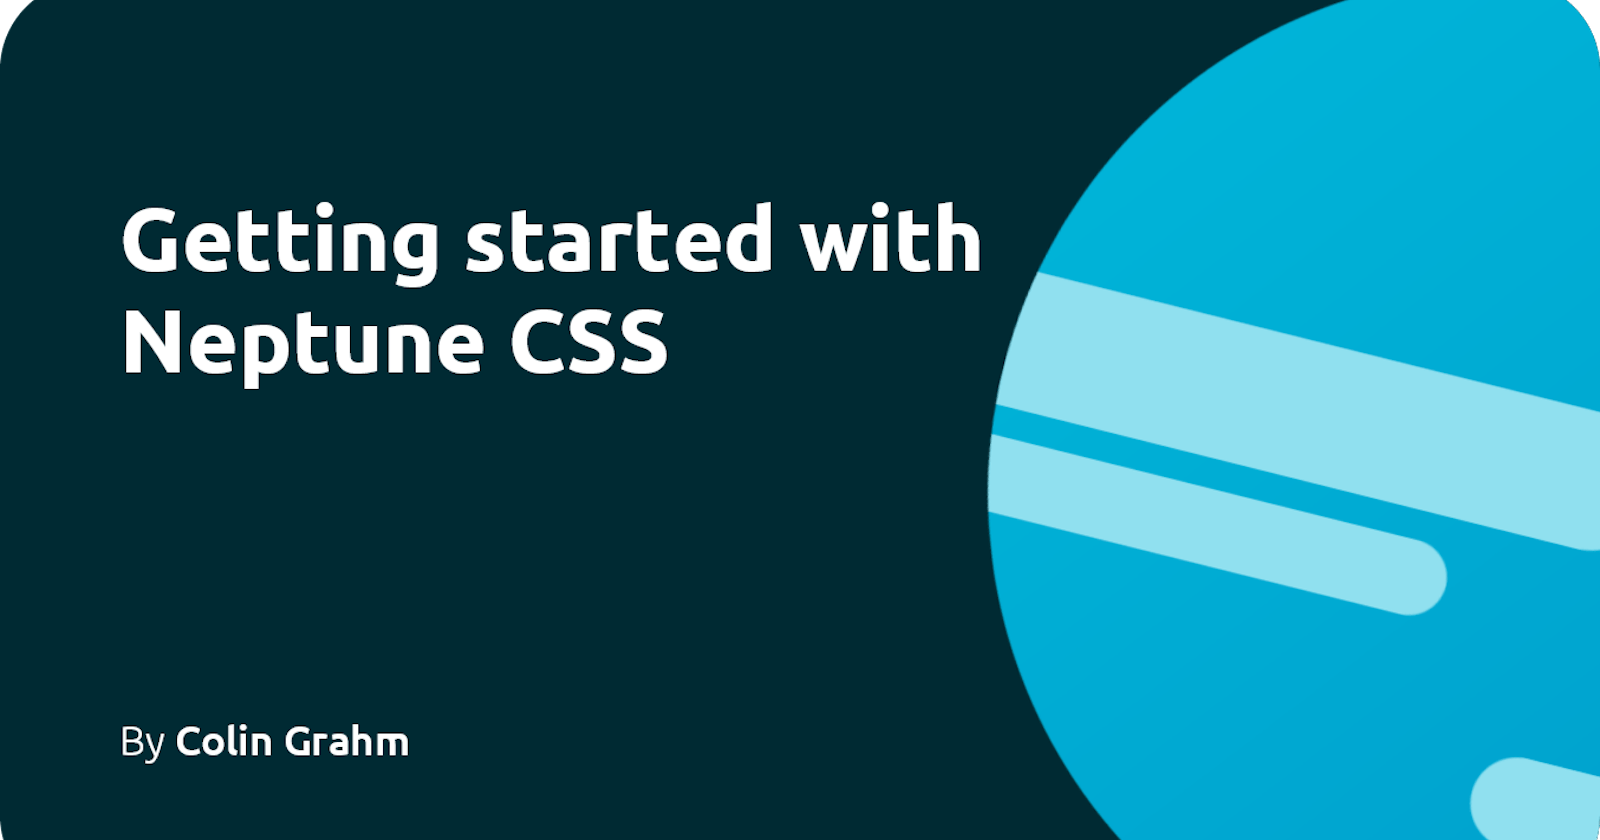 Getting started with Neptune CSS